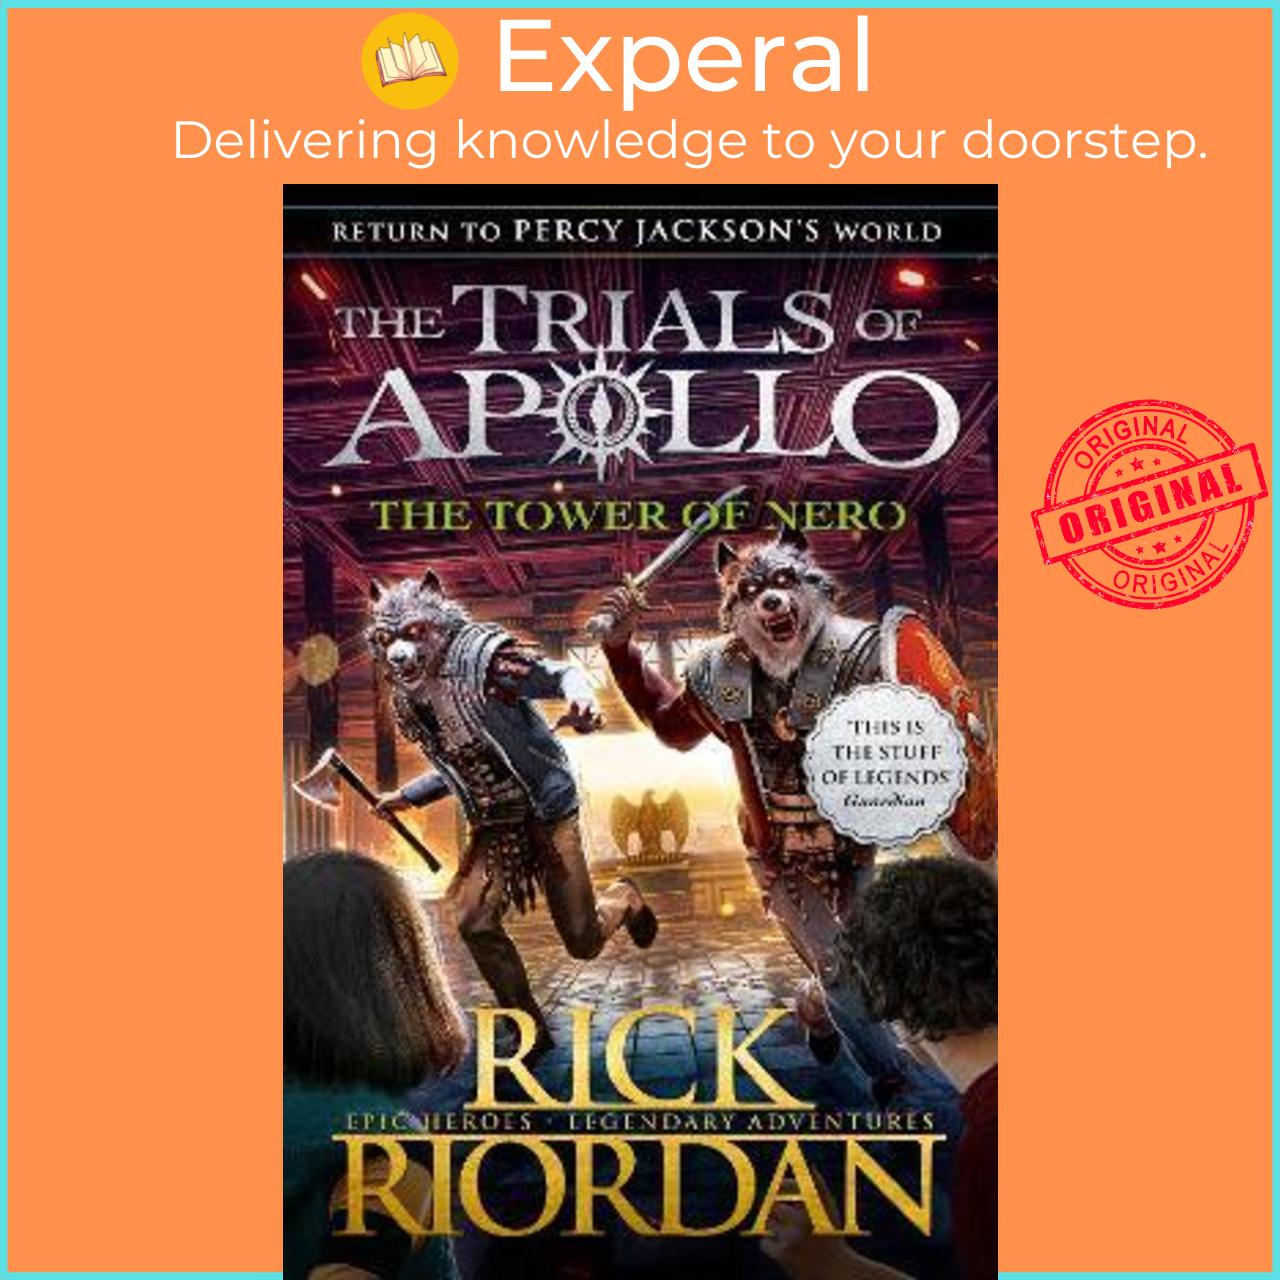 Sách - The Tower of Nero (The Trials of Apollo Book 5) by Rick Riordan (UK edition, paperback)